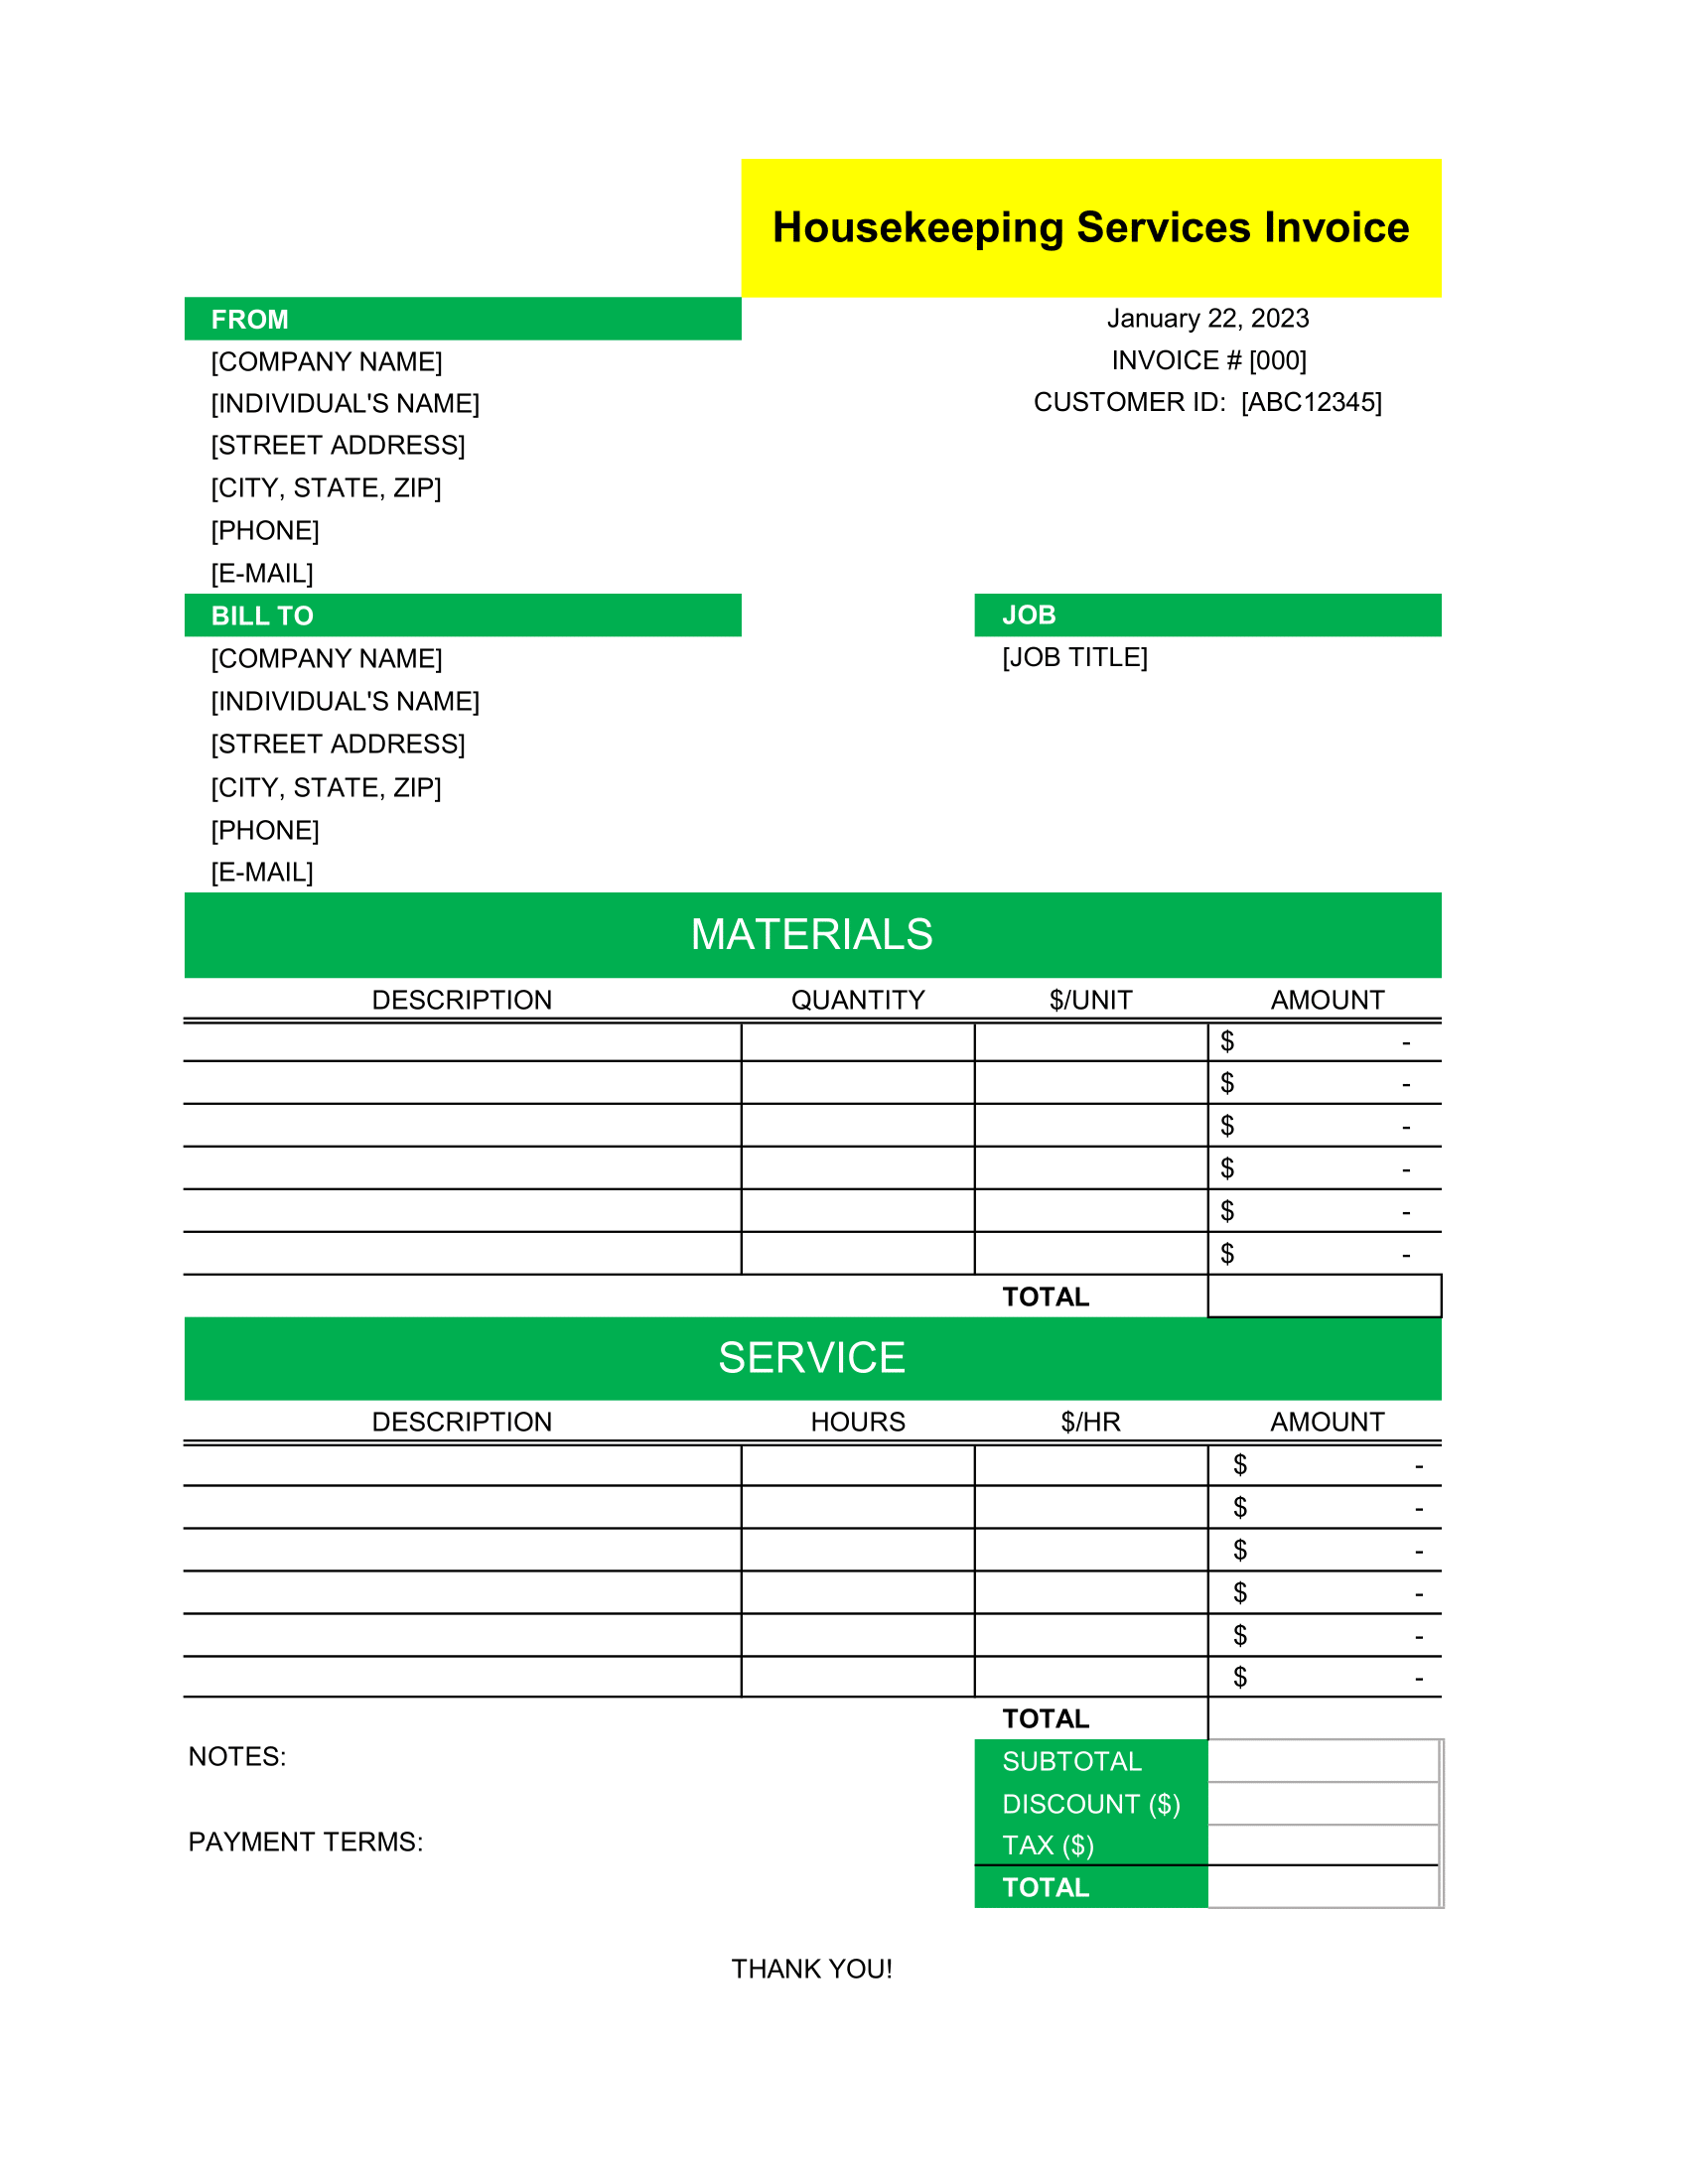 HouseKeeping Services Invoice format